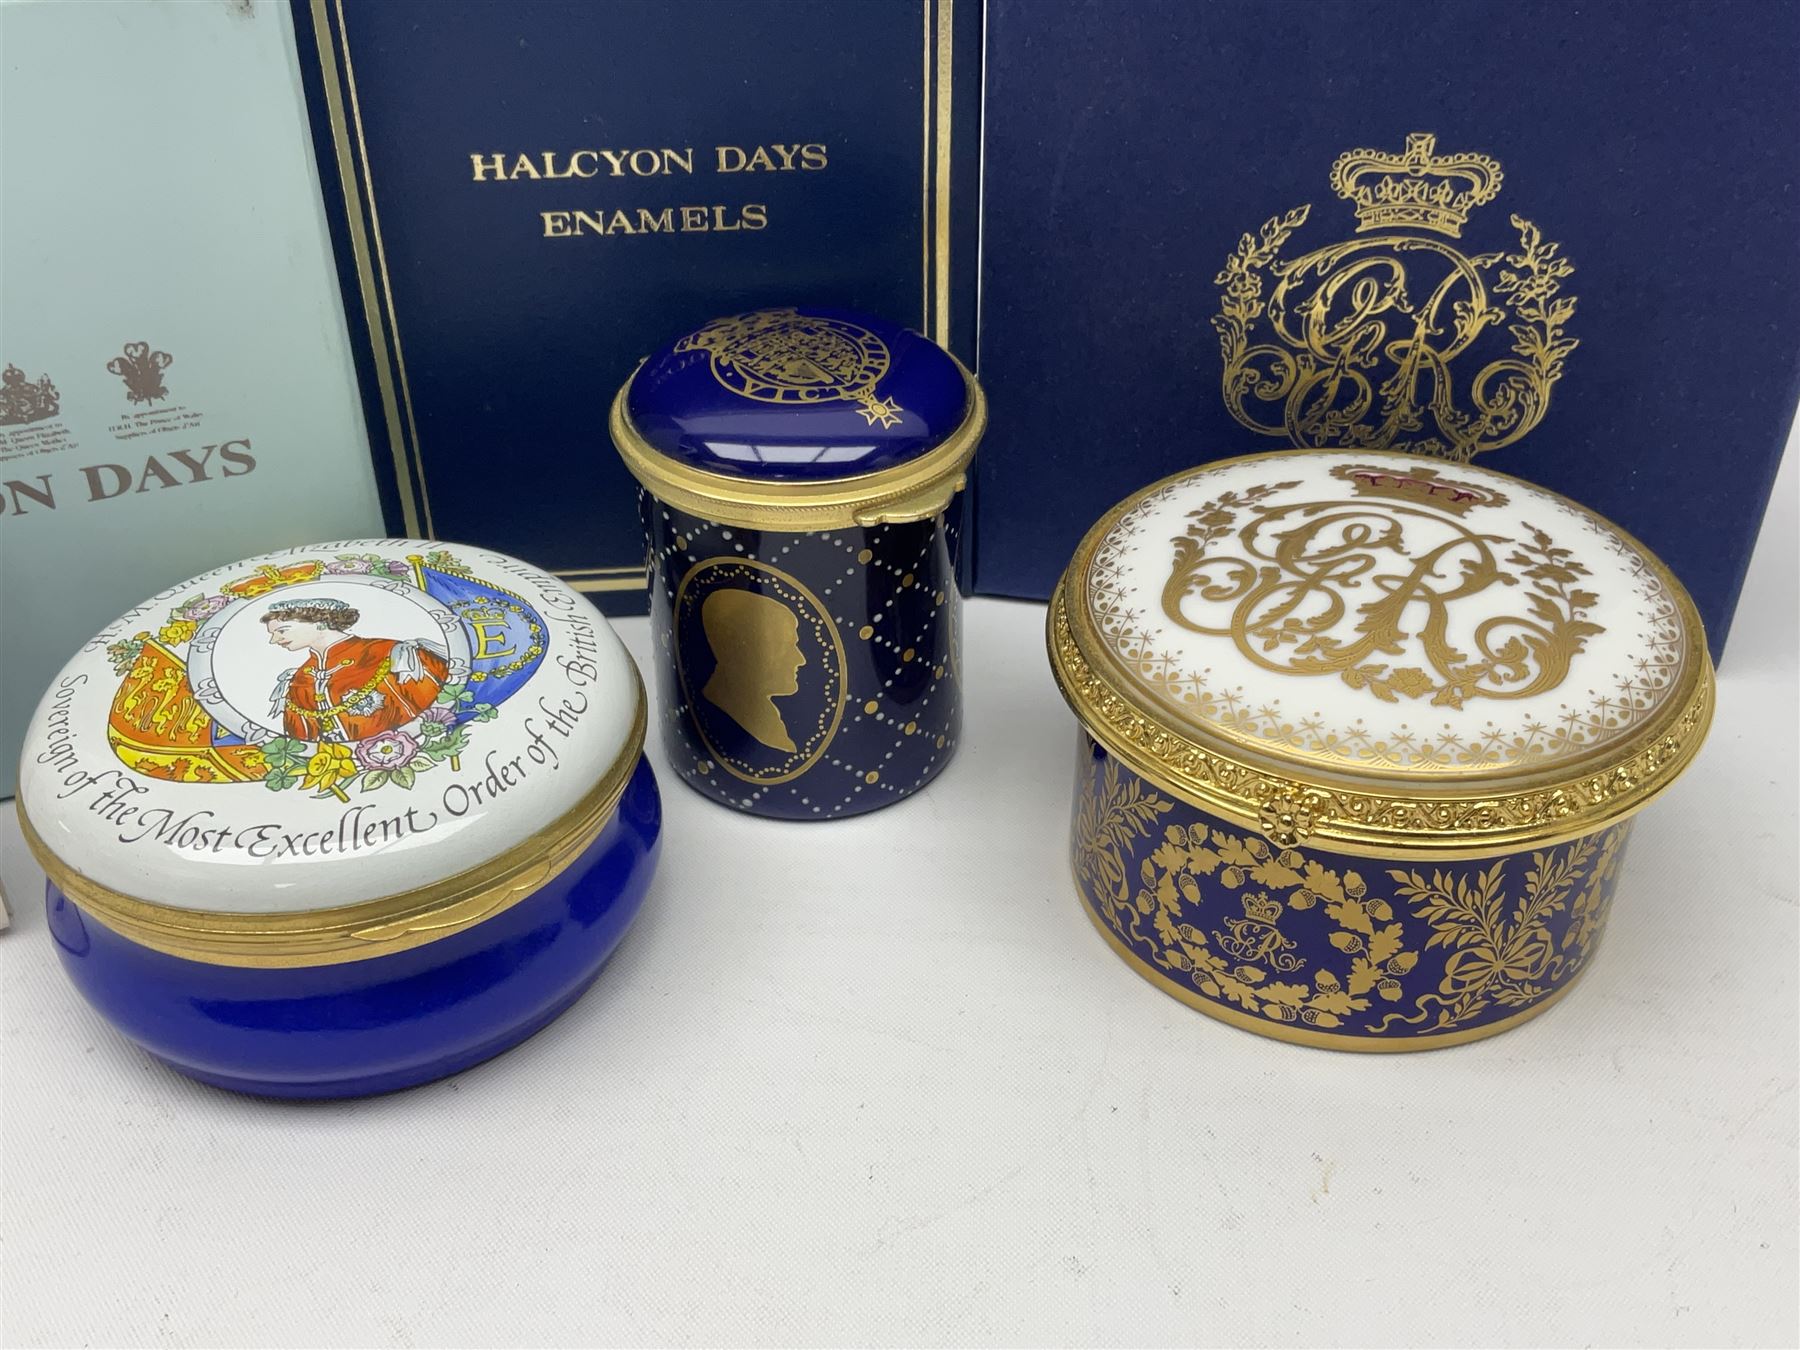 Five Halcyon Days Royal commemorative enamel boxes and one other similar enamel box - Image 12 of 15